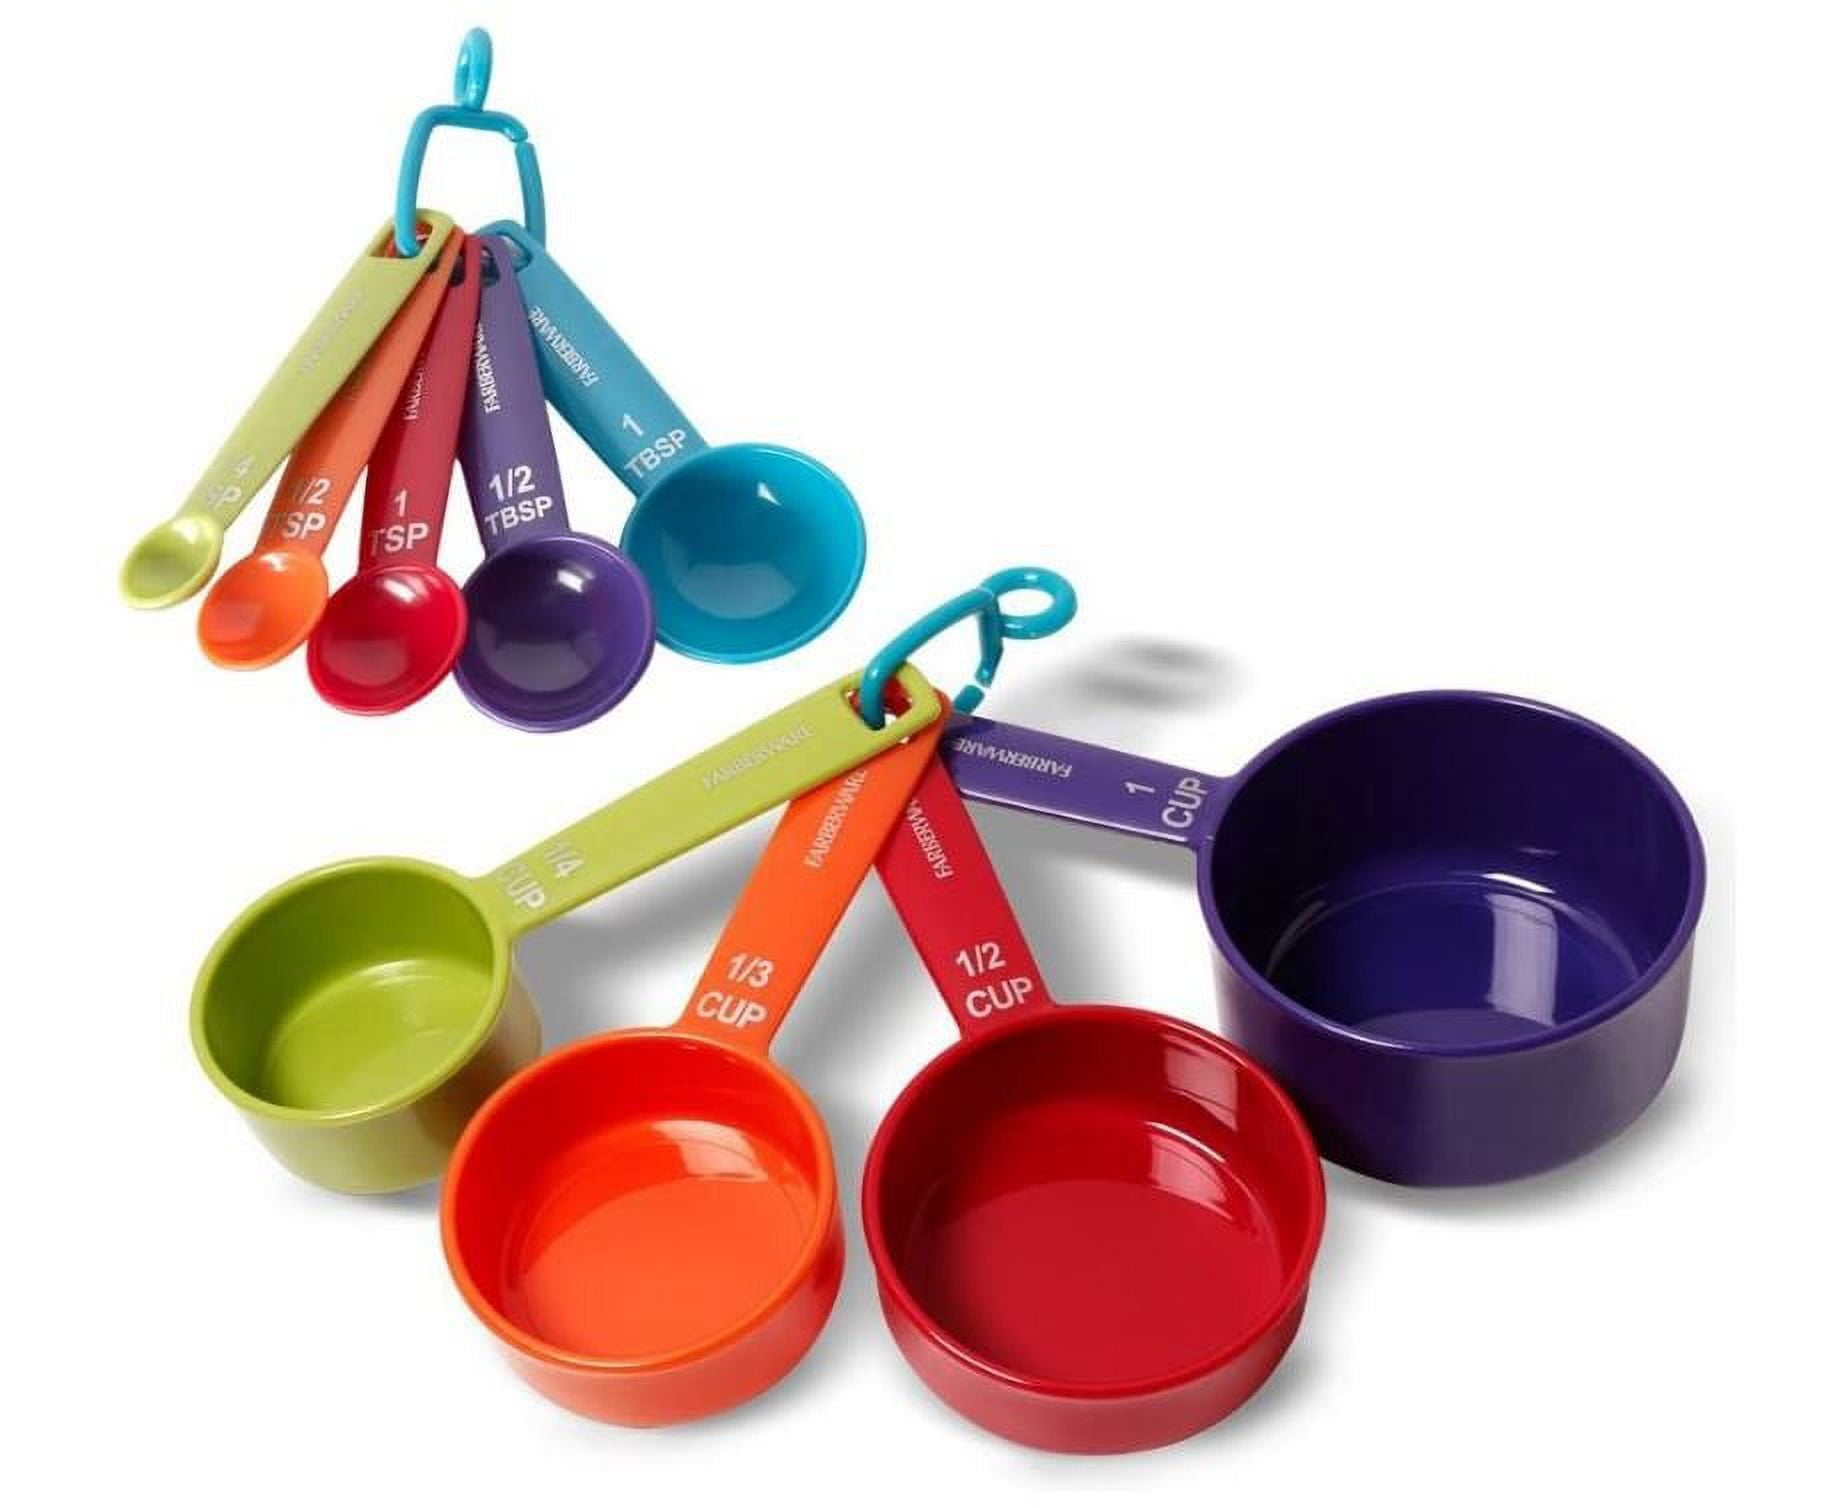 COOK WITH COLOR Measuring Cup Set - 9 PC. Nesting Stackable Liquid